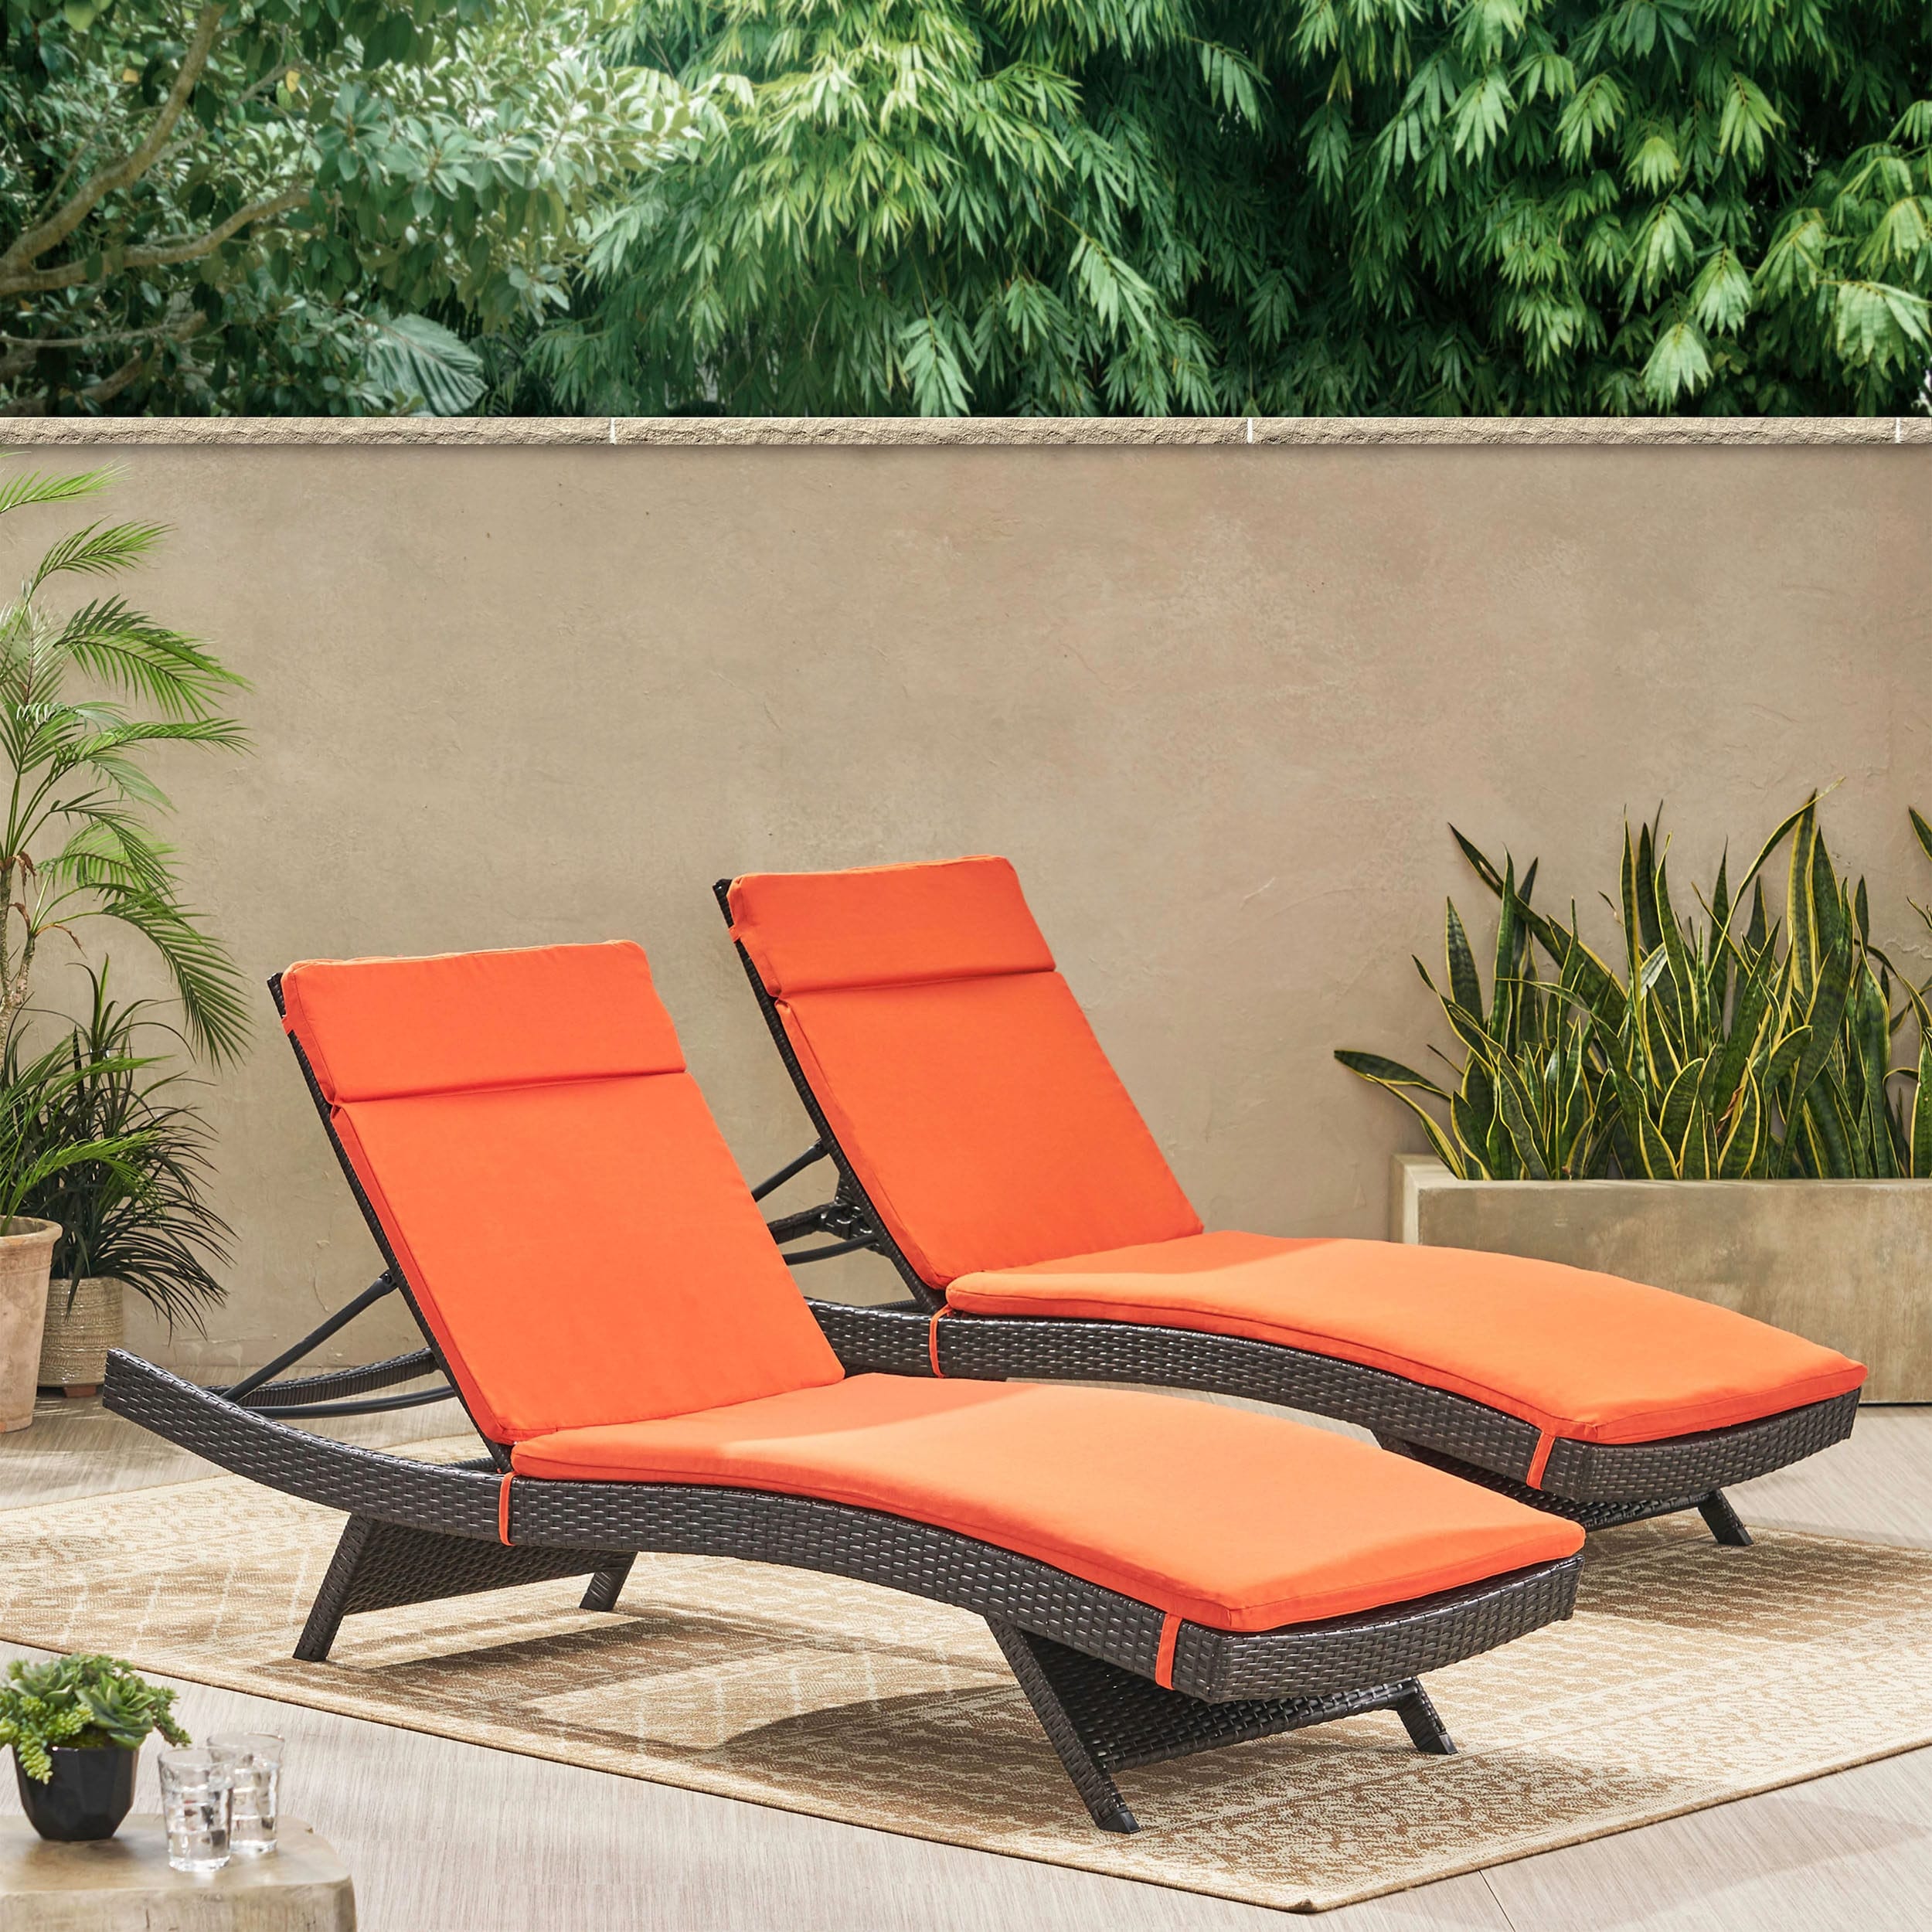 Salem Outdoor Wicker Lounge With Water Resistant Cushion (set Of 2) By Christopher Knight Home